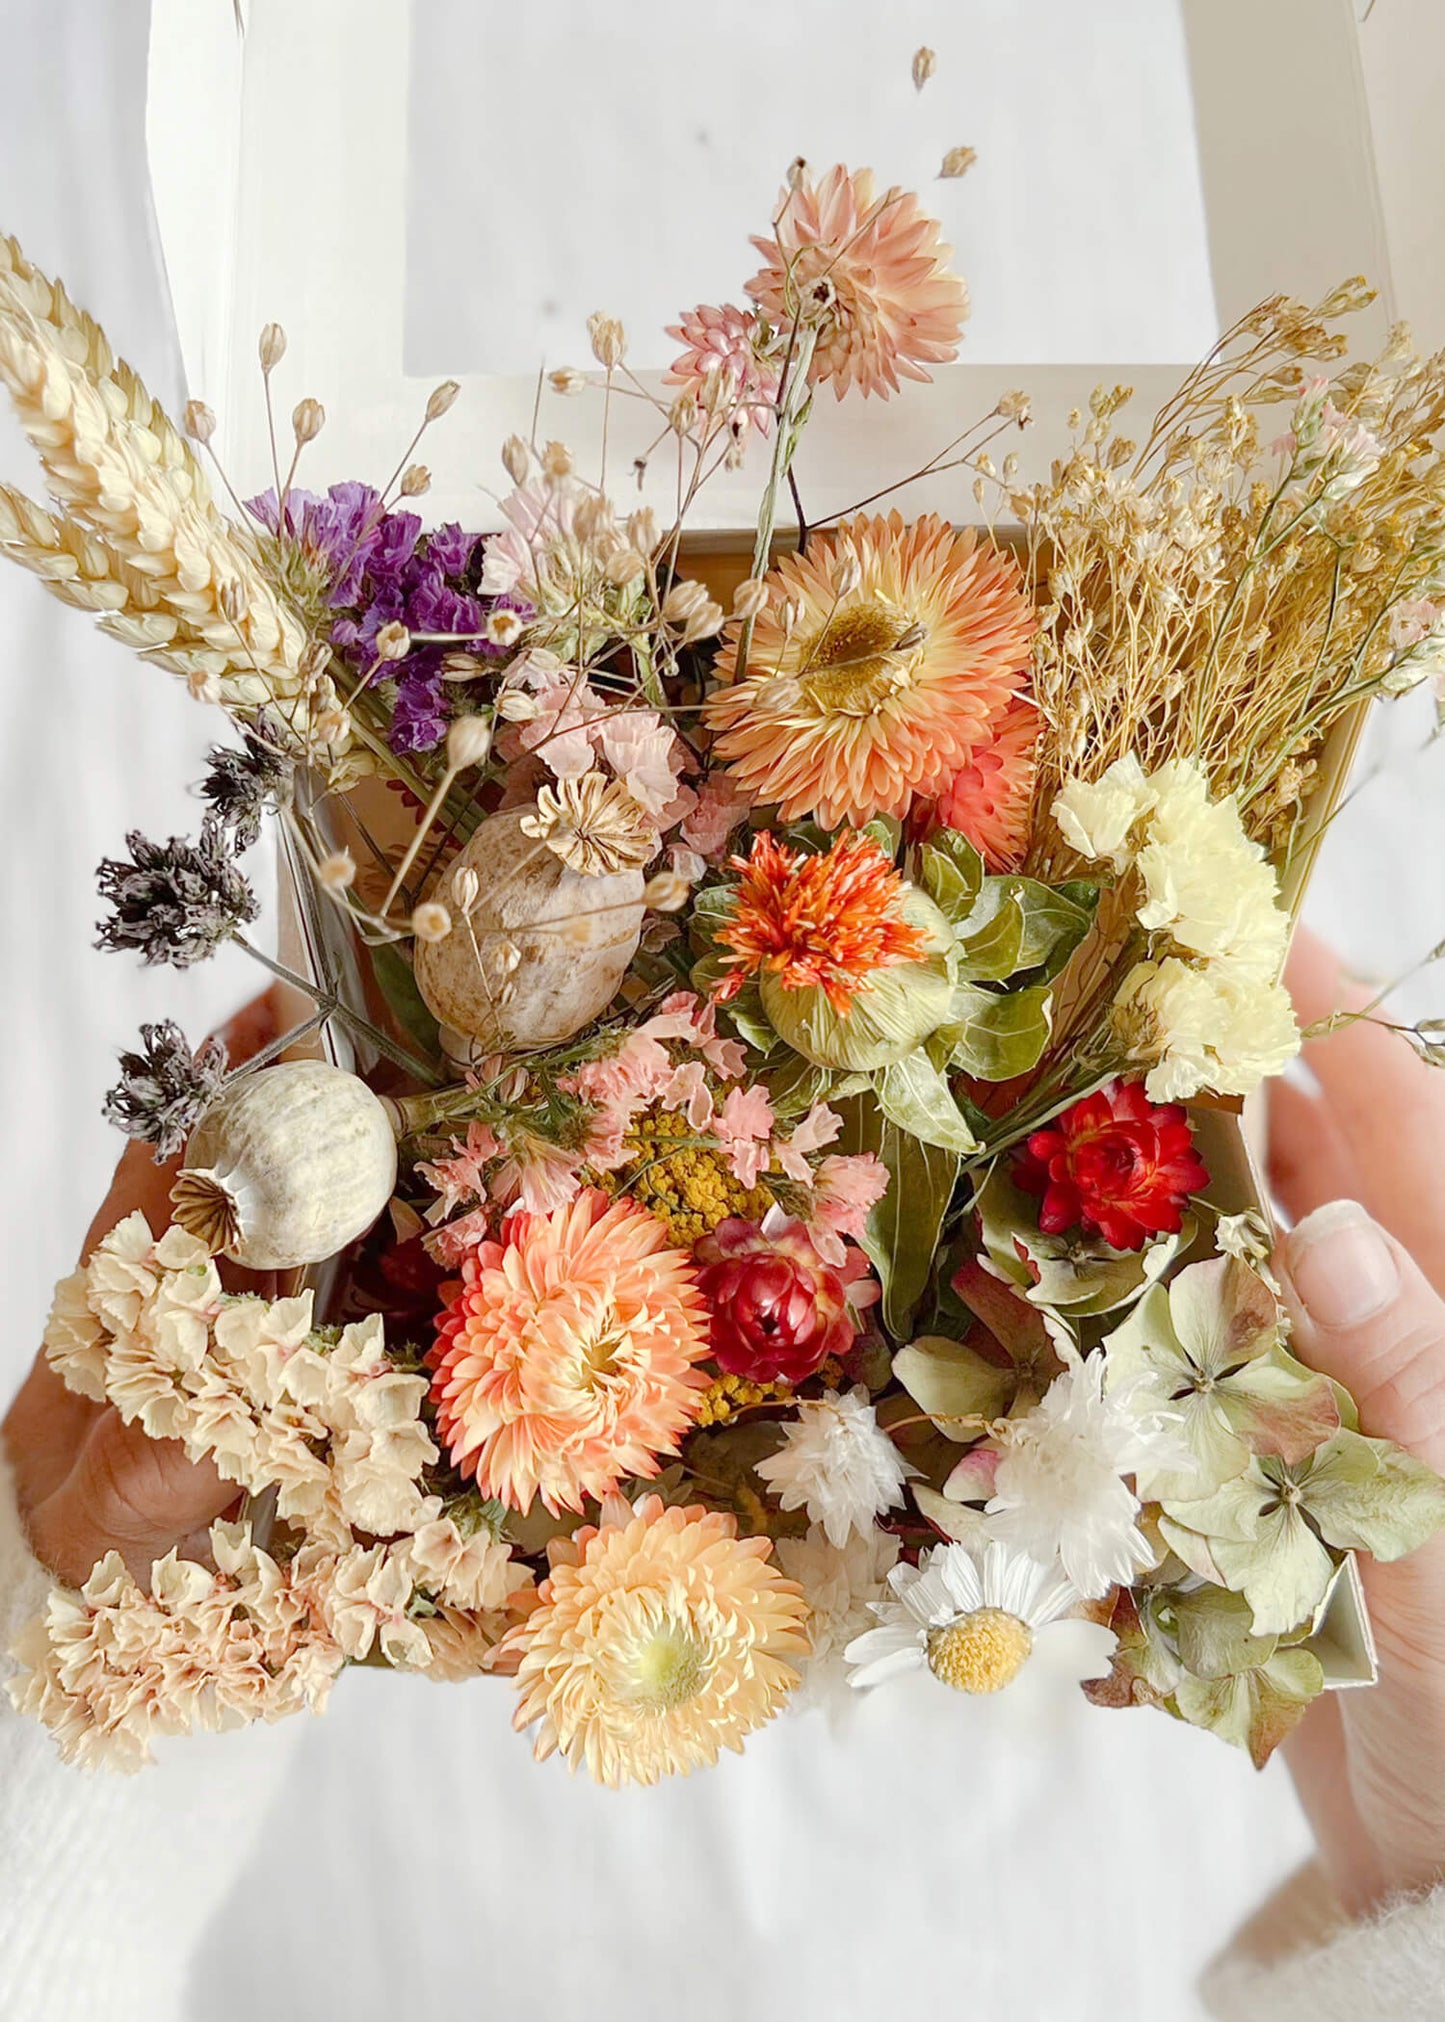 Choose Your Own Dried Flower Mix